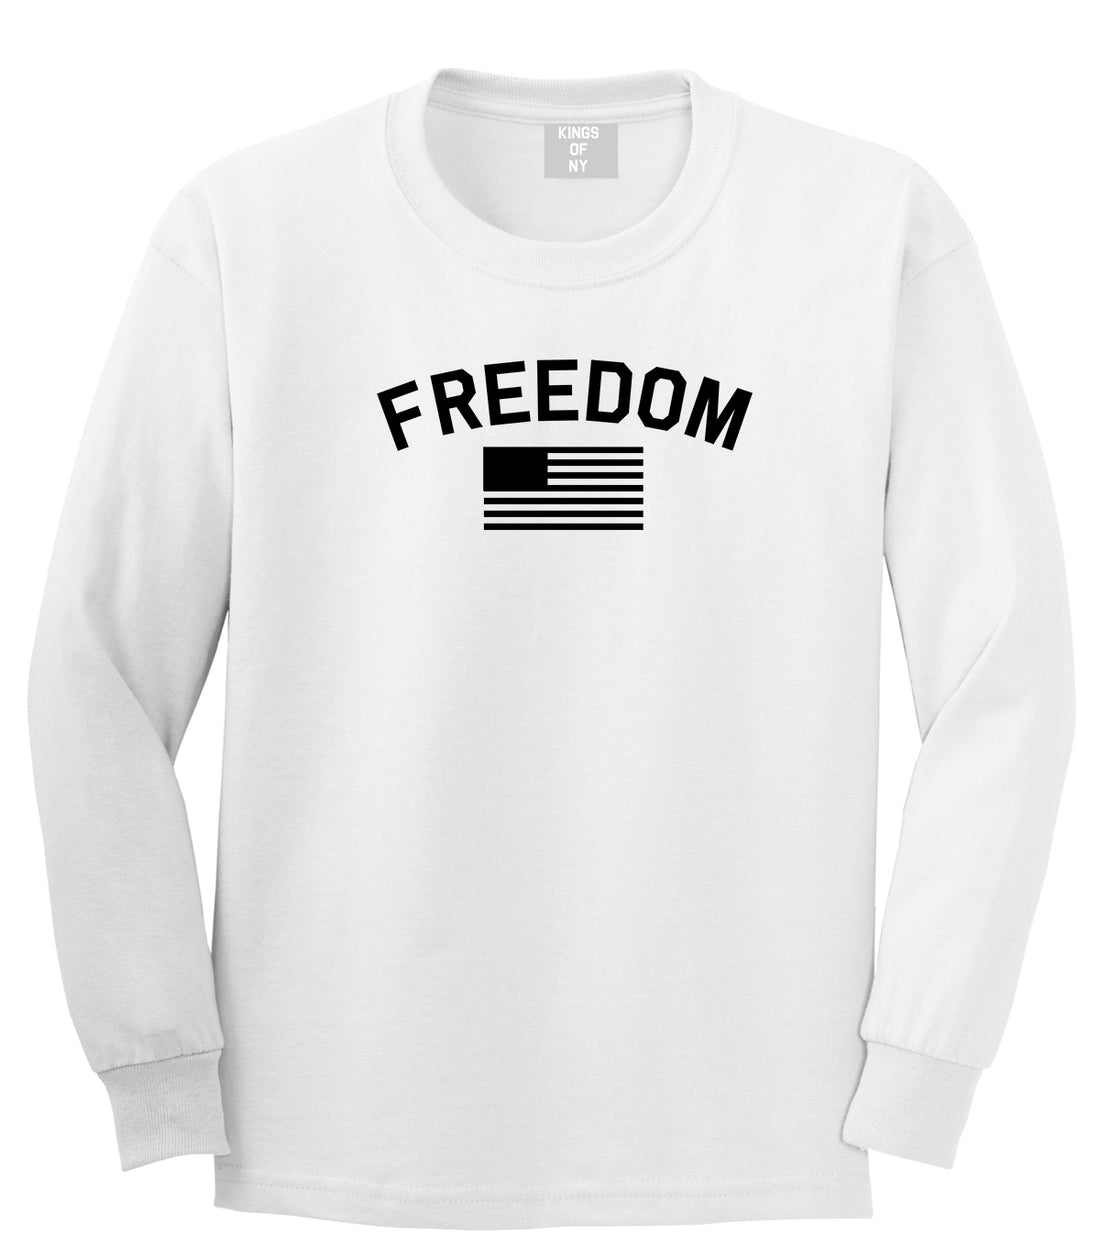 Freedom Flag Mens White Long Sleeve T-Shirt by KINGS OF NY